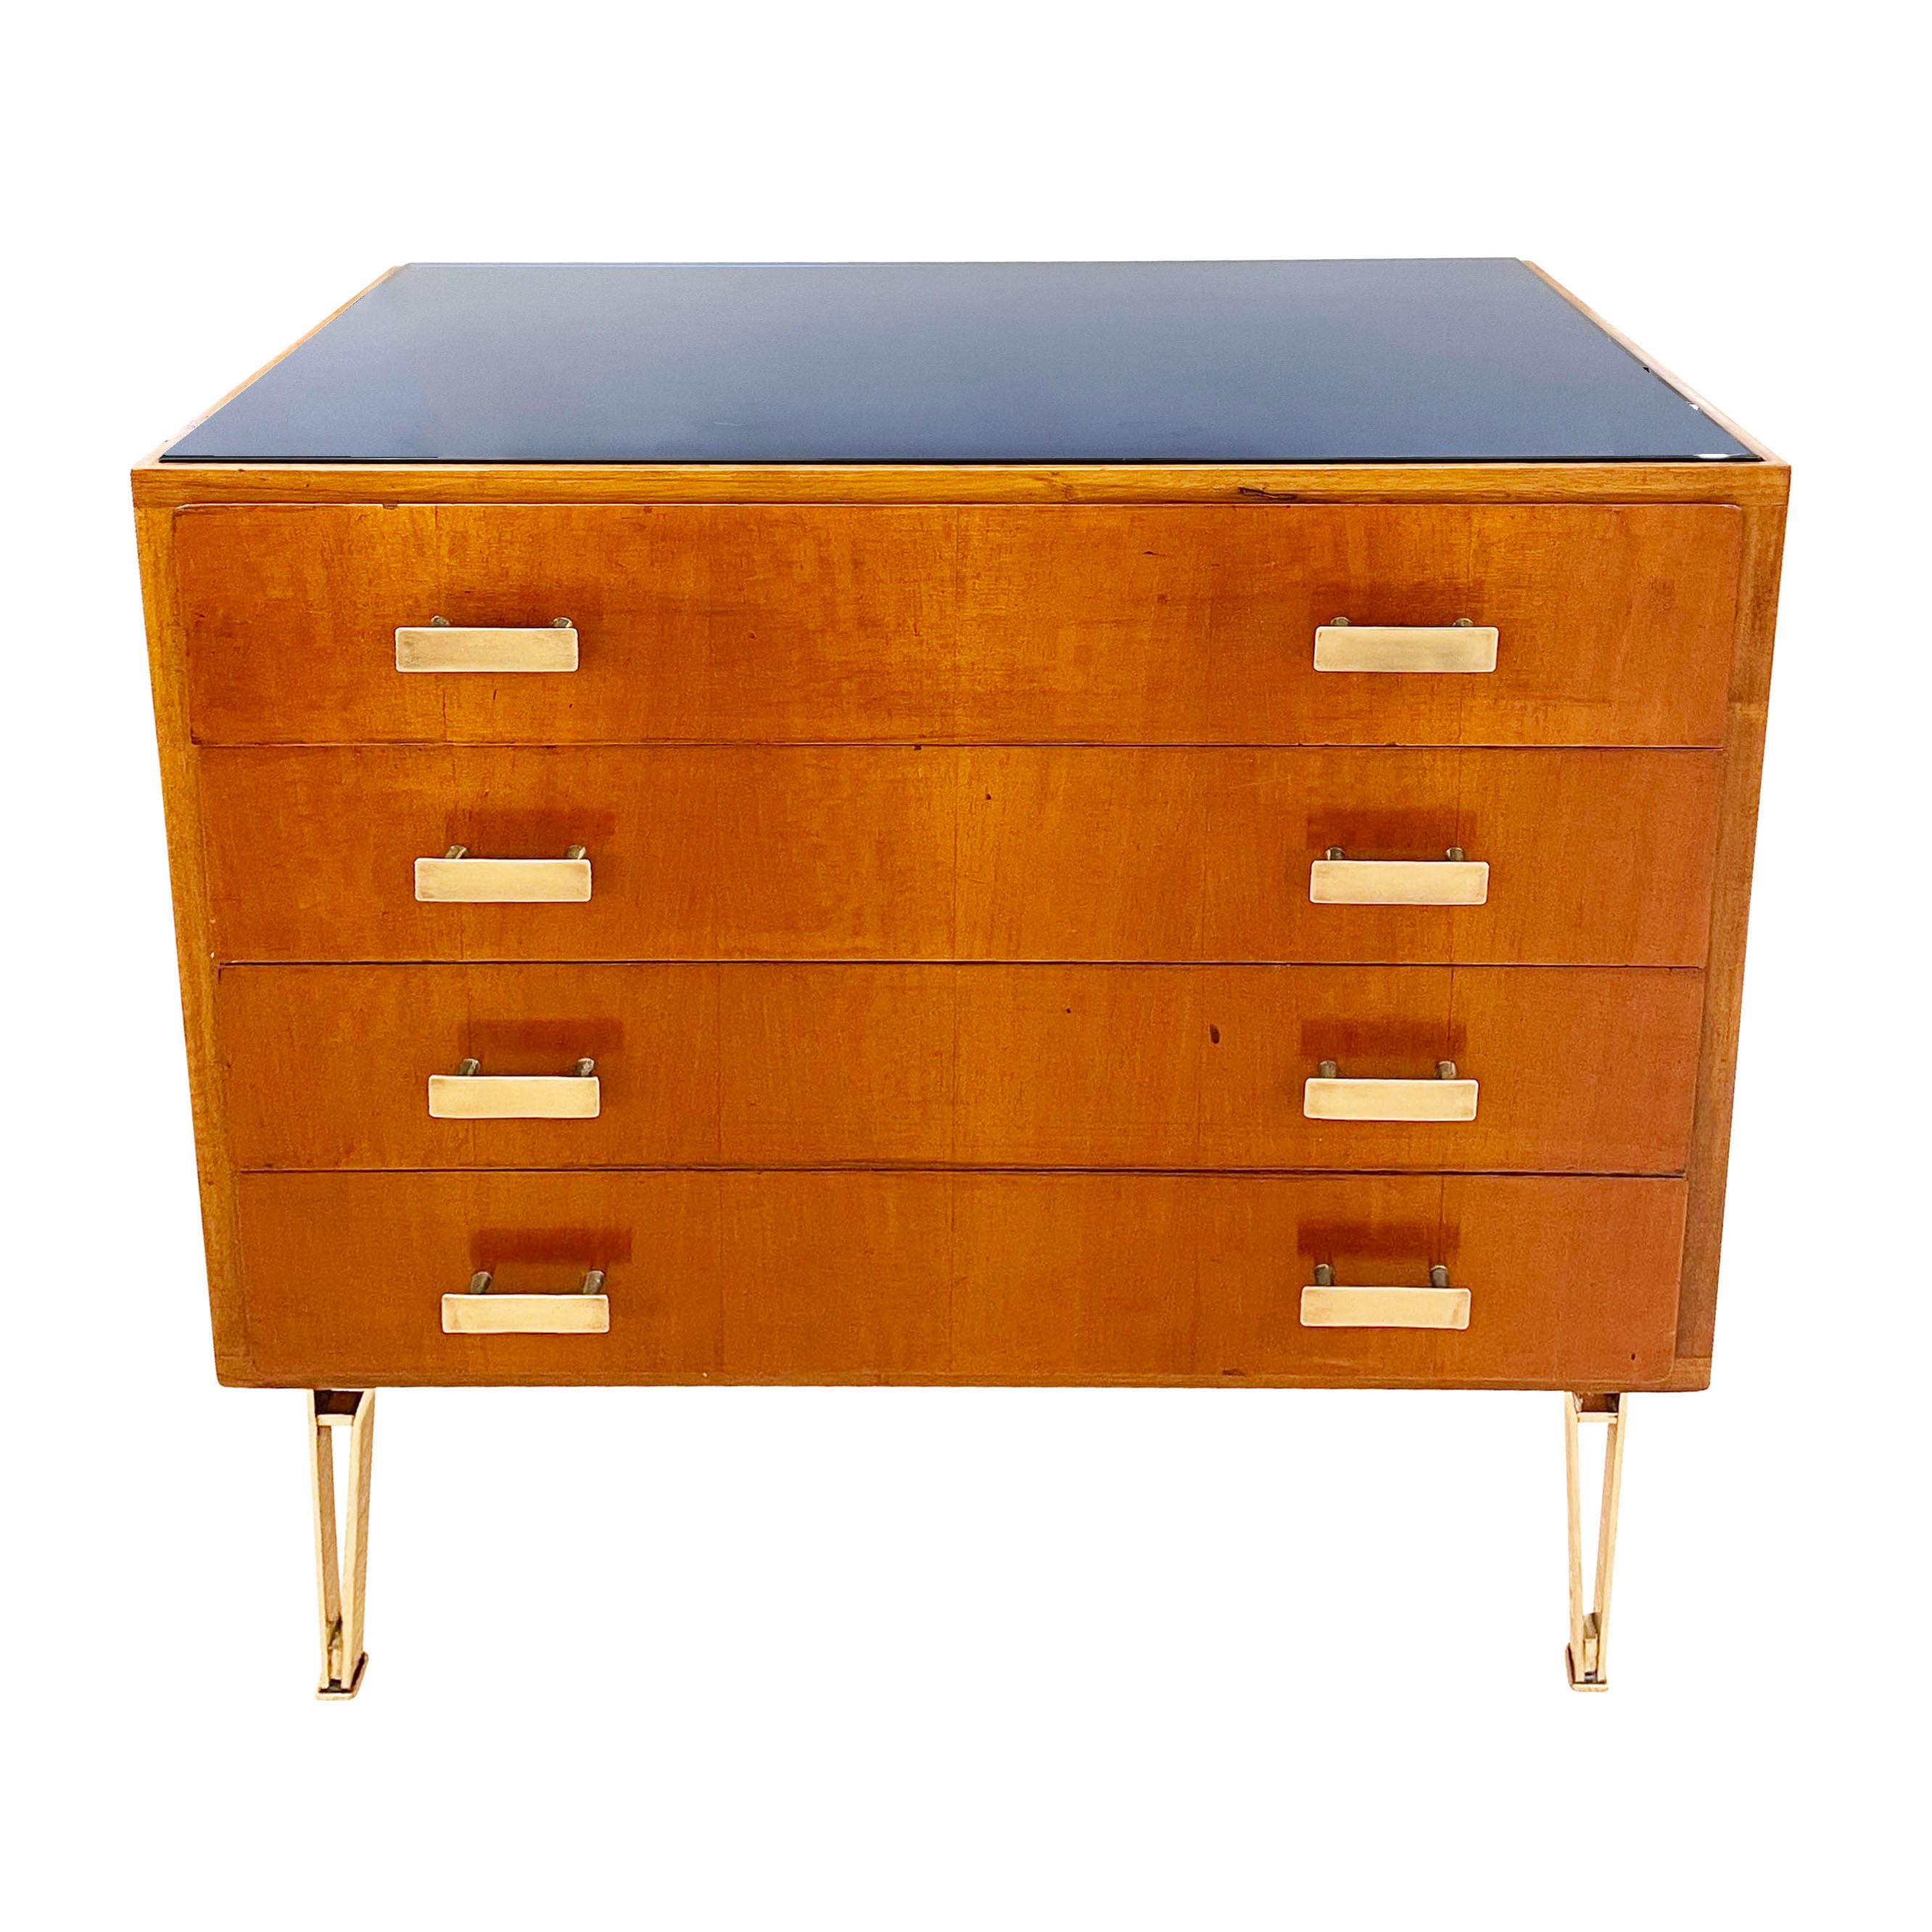 Italian Mid-Century wood chest with brass hardware and a blue glass top.

Condition: Excellent vintage condition, minor wear consistent with age and use

Measures: Width: 29.25”

Depth: 19”

Hight: 34.25”

 